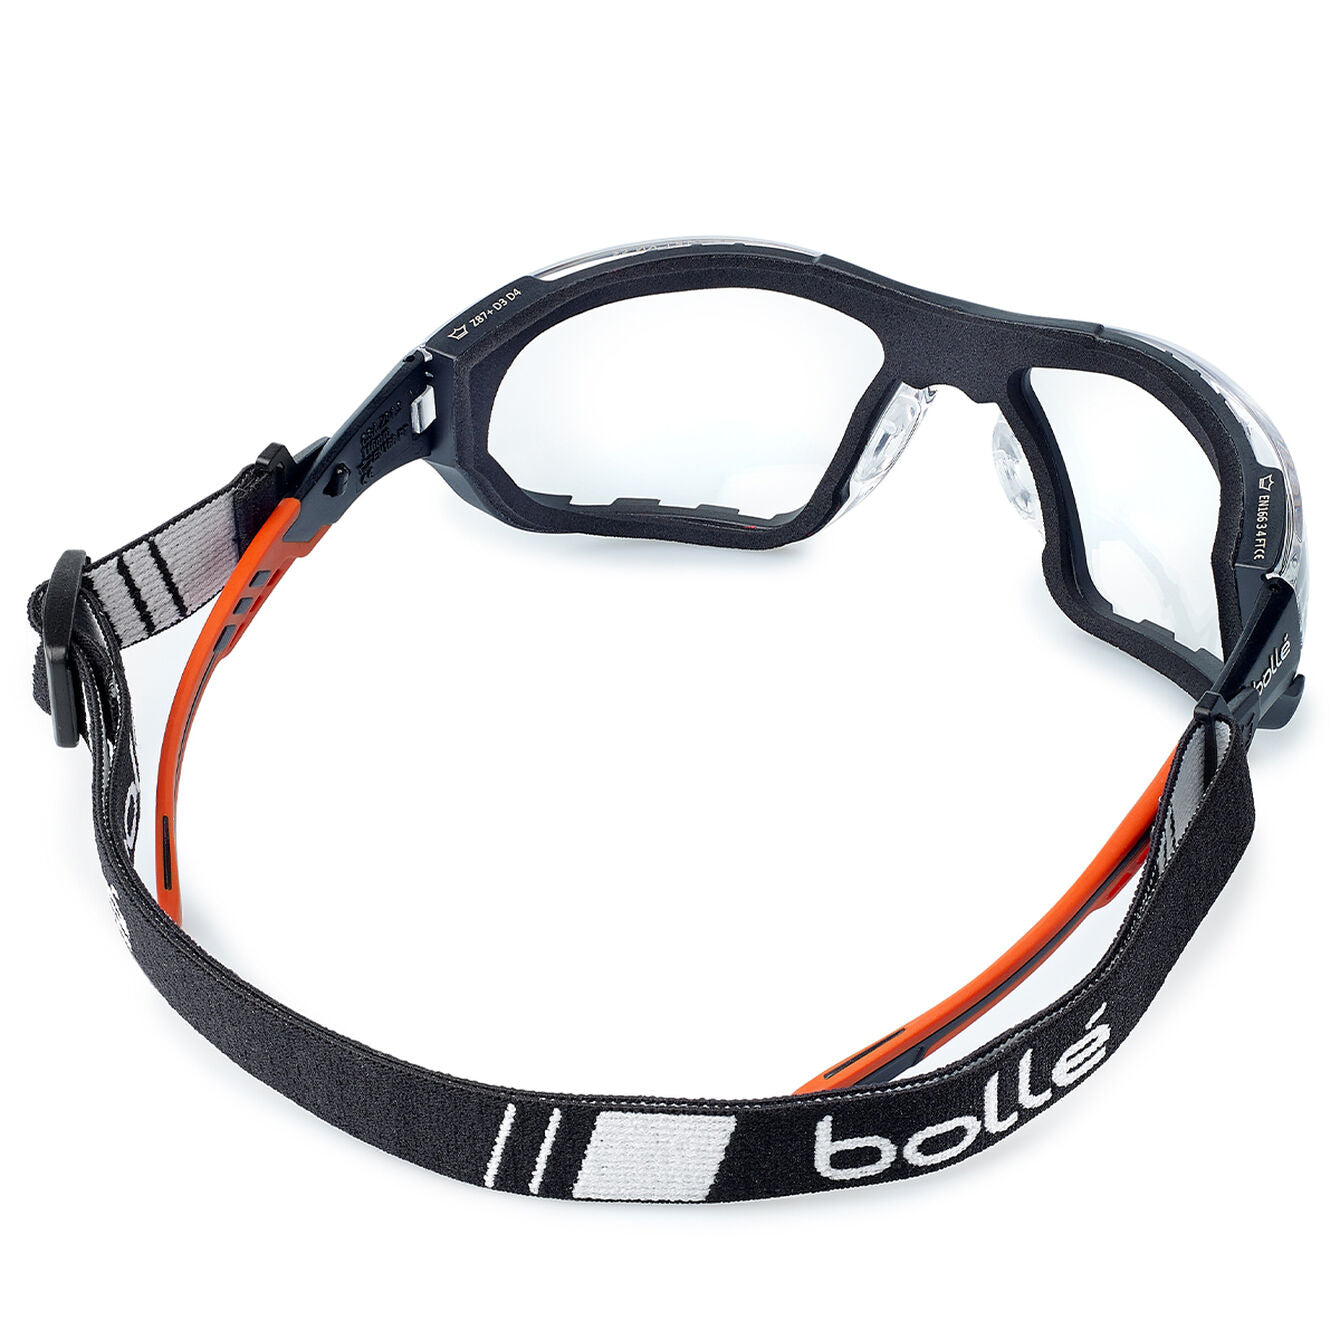 Bolle NESS+ Clear Lens Safety Glasses with Foam and Strap - PSSNESF028